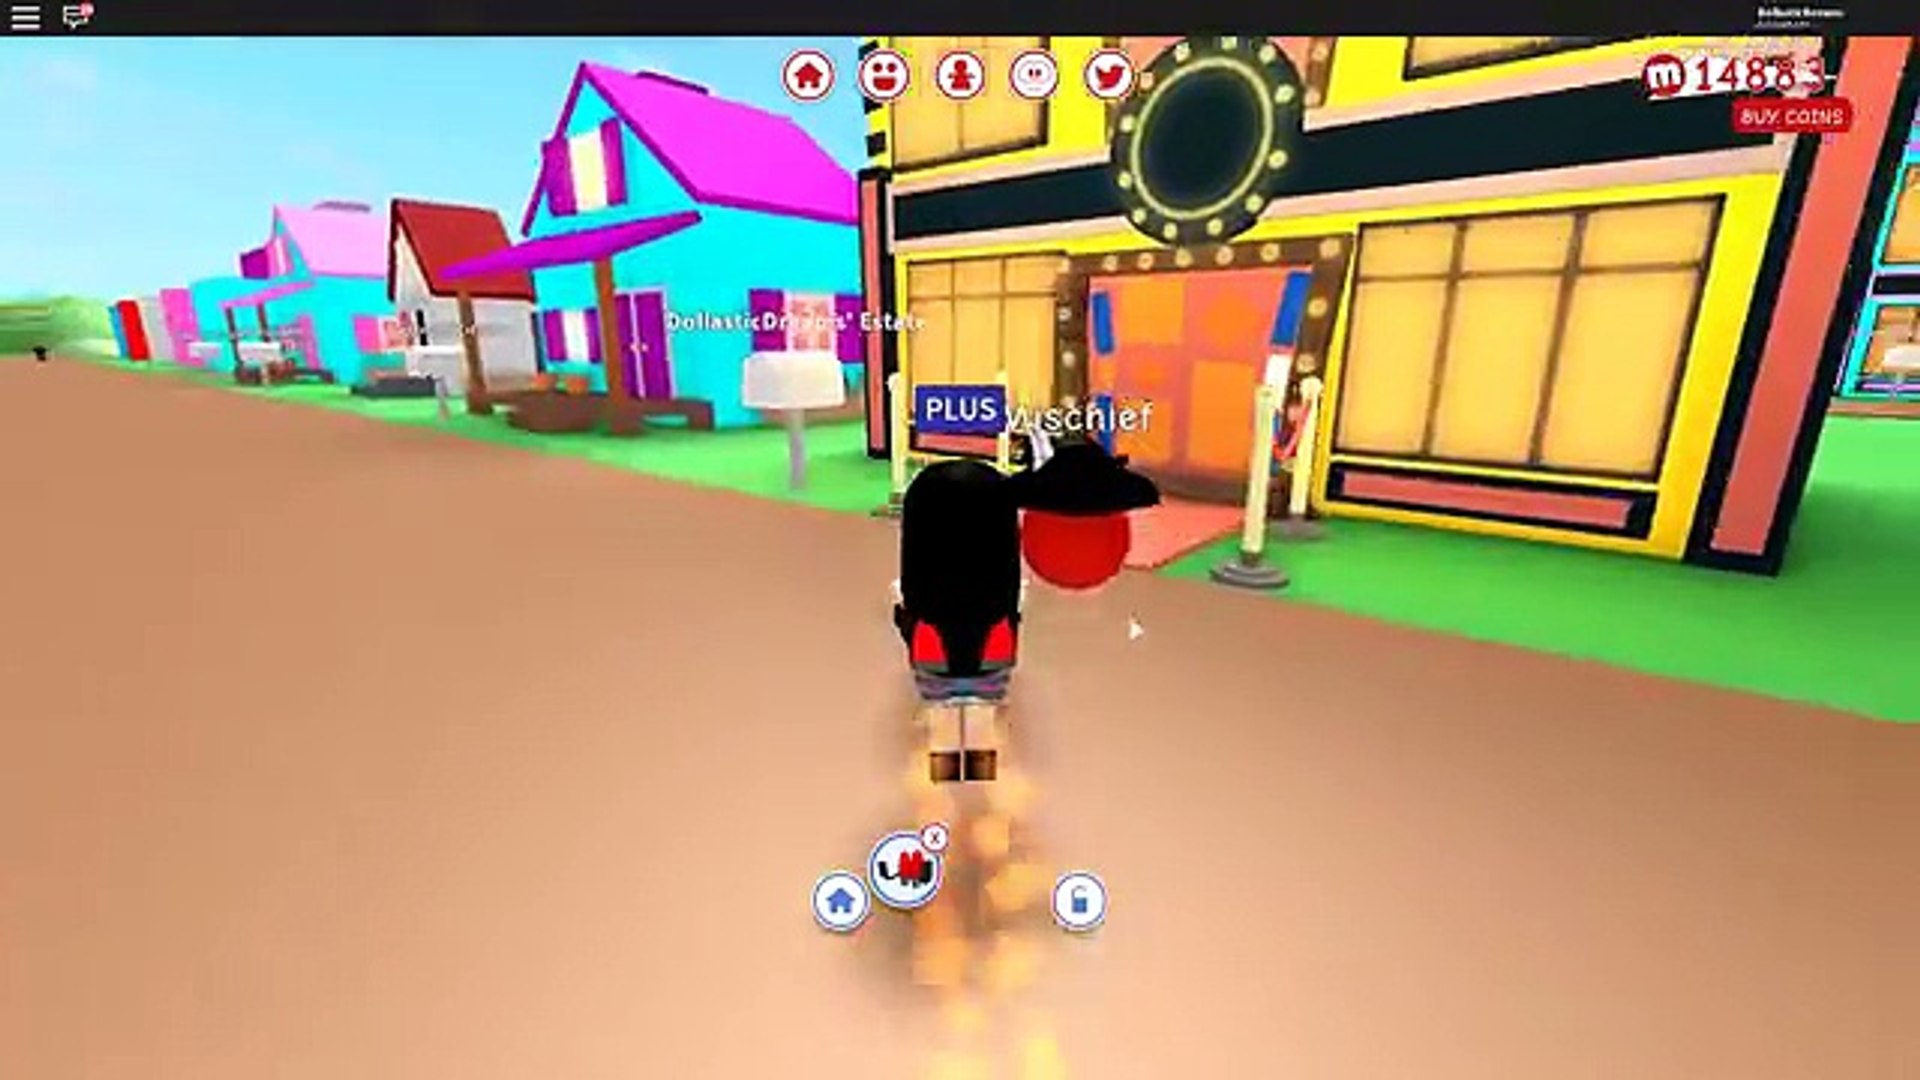 Lastic Goes Shopping Splurging New Meep Toys Jet Pack Roblox Meepcity Dollastic Plays Dailymotion Video - roblox game meep city